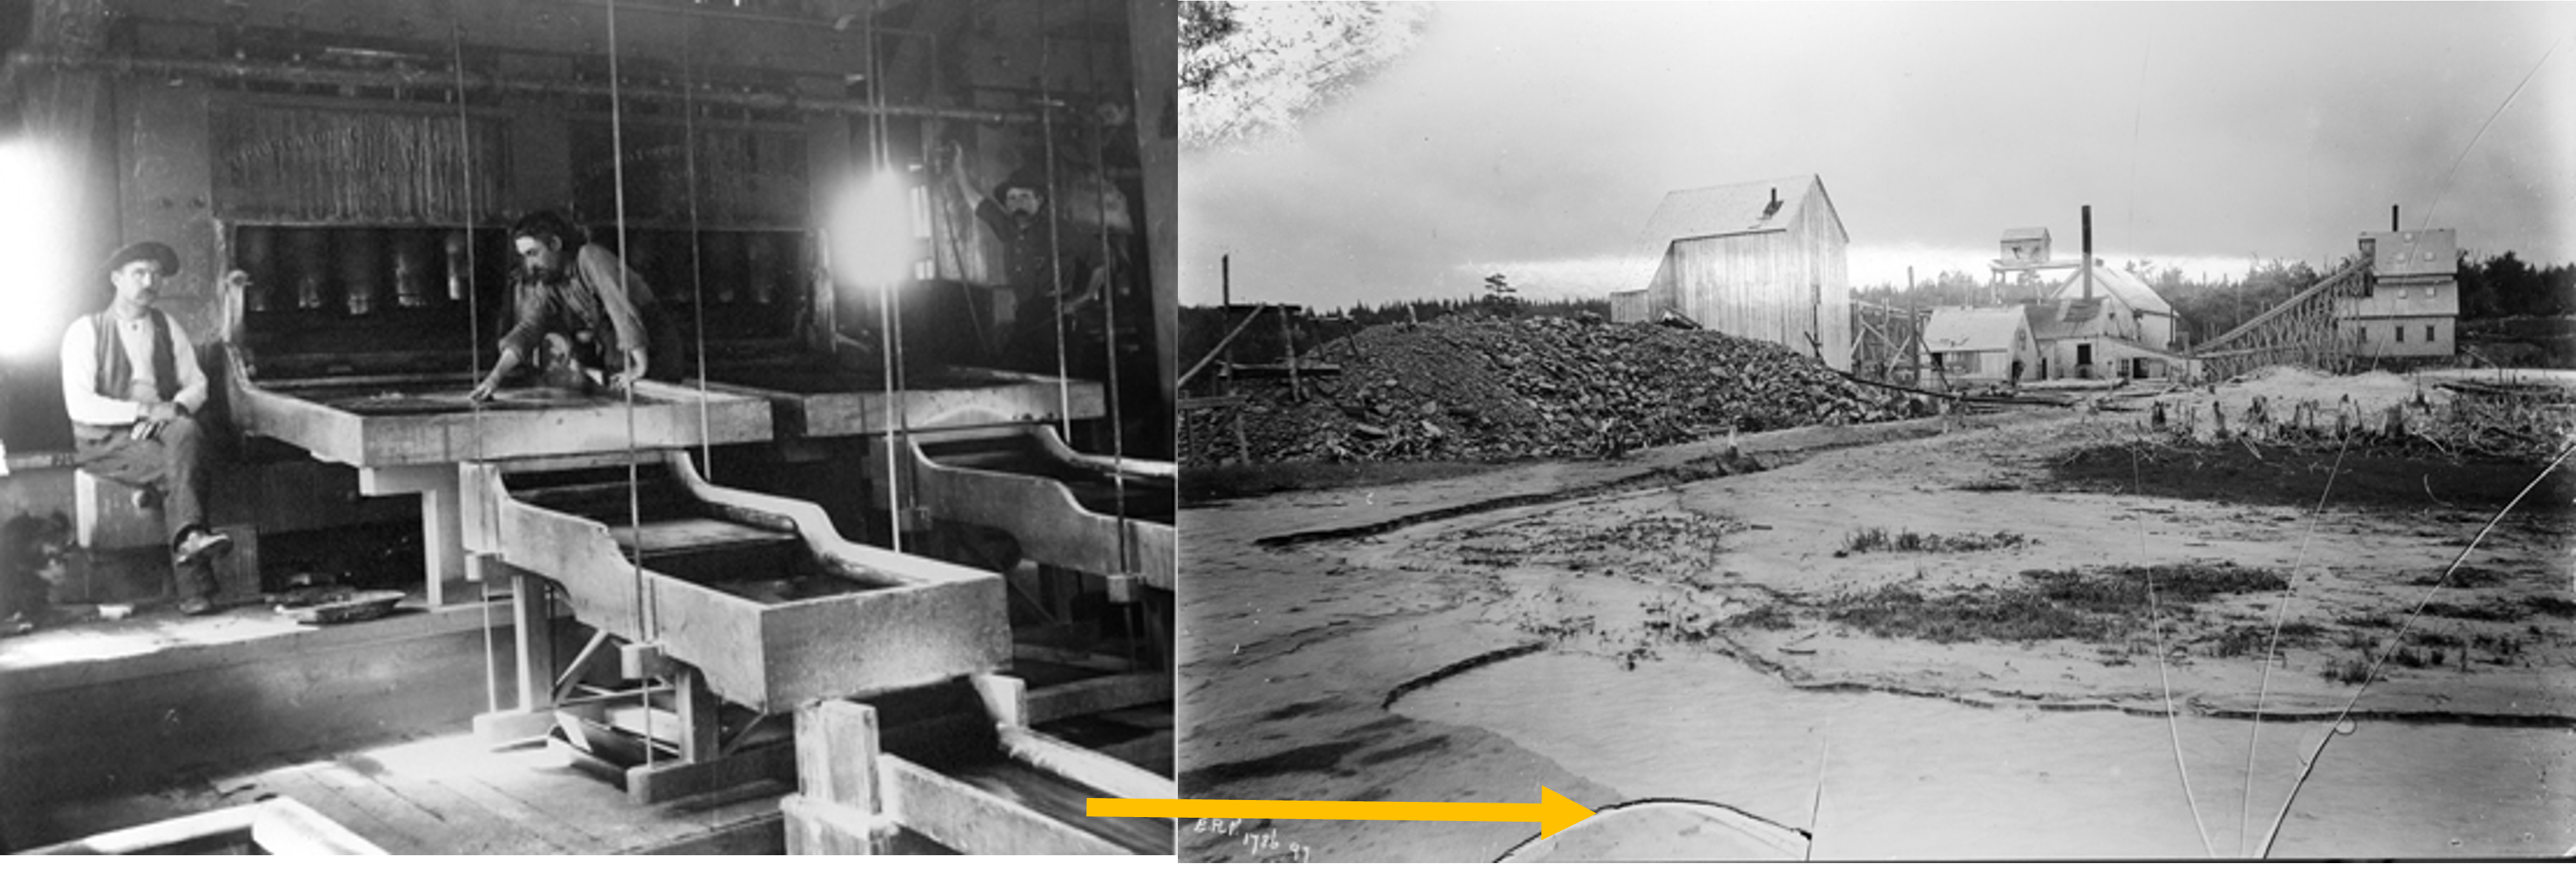 Two historical photos.  One shows the interior of a stamp mill / amalgamation processing from 1860's.  Other shows the exterior of ore processing centers showing how tailings moved downstream.